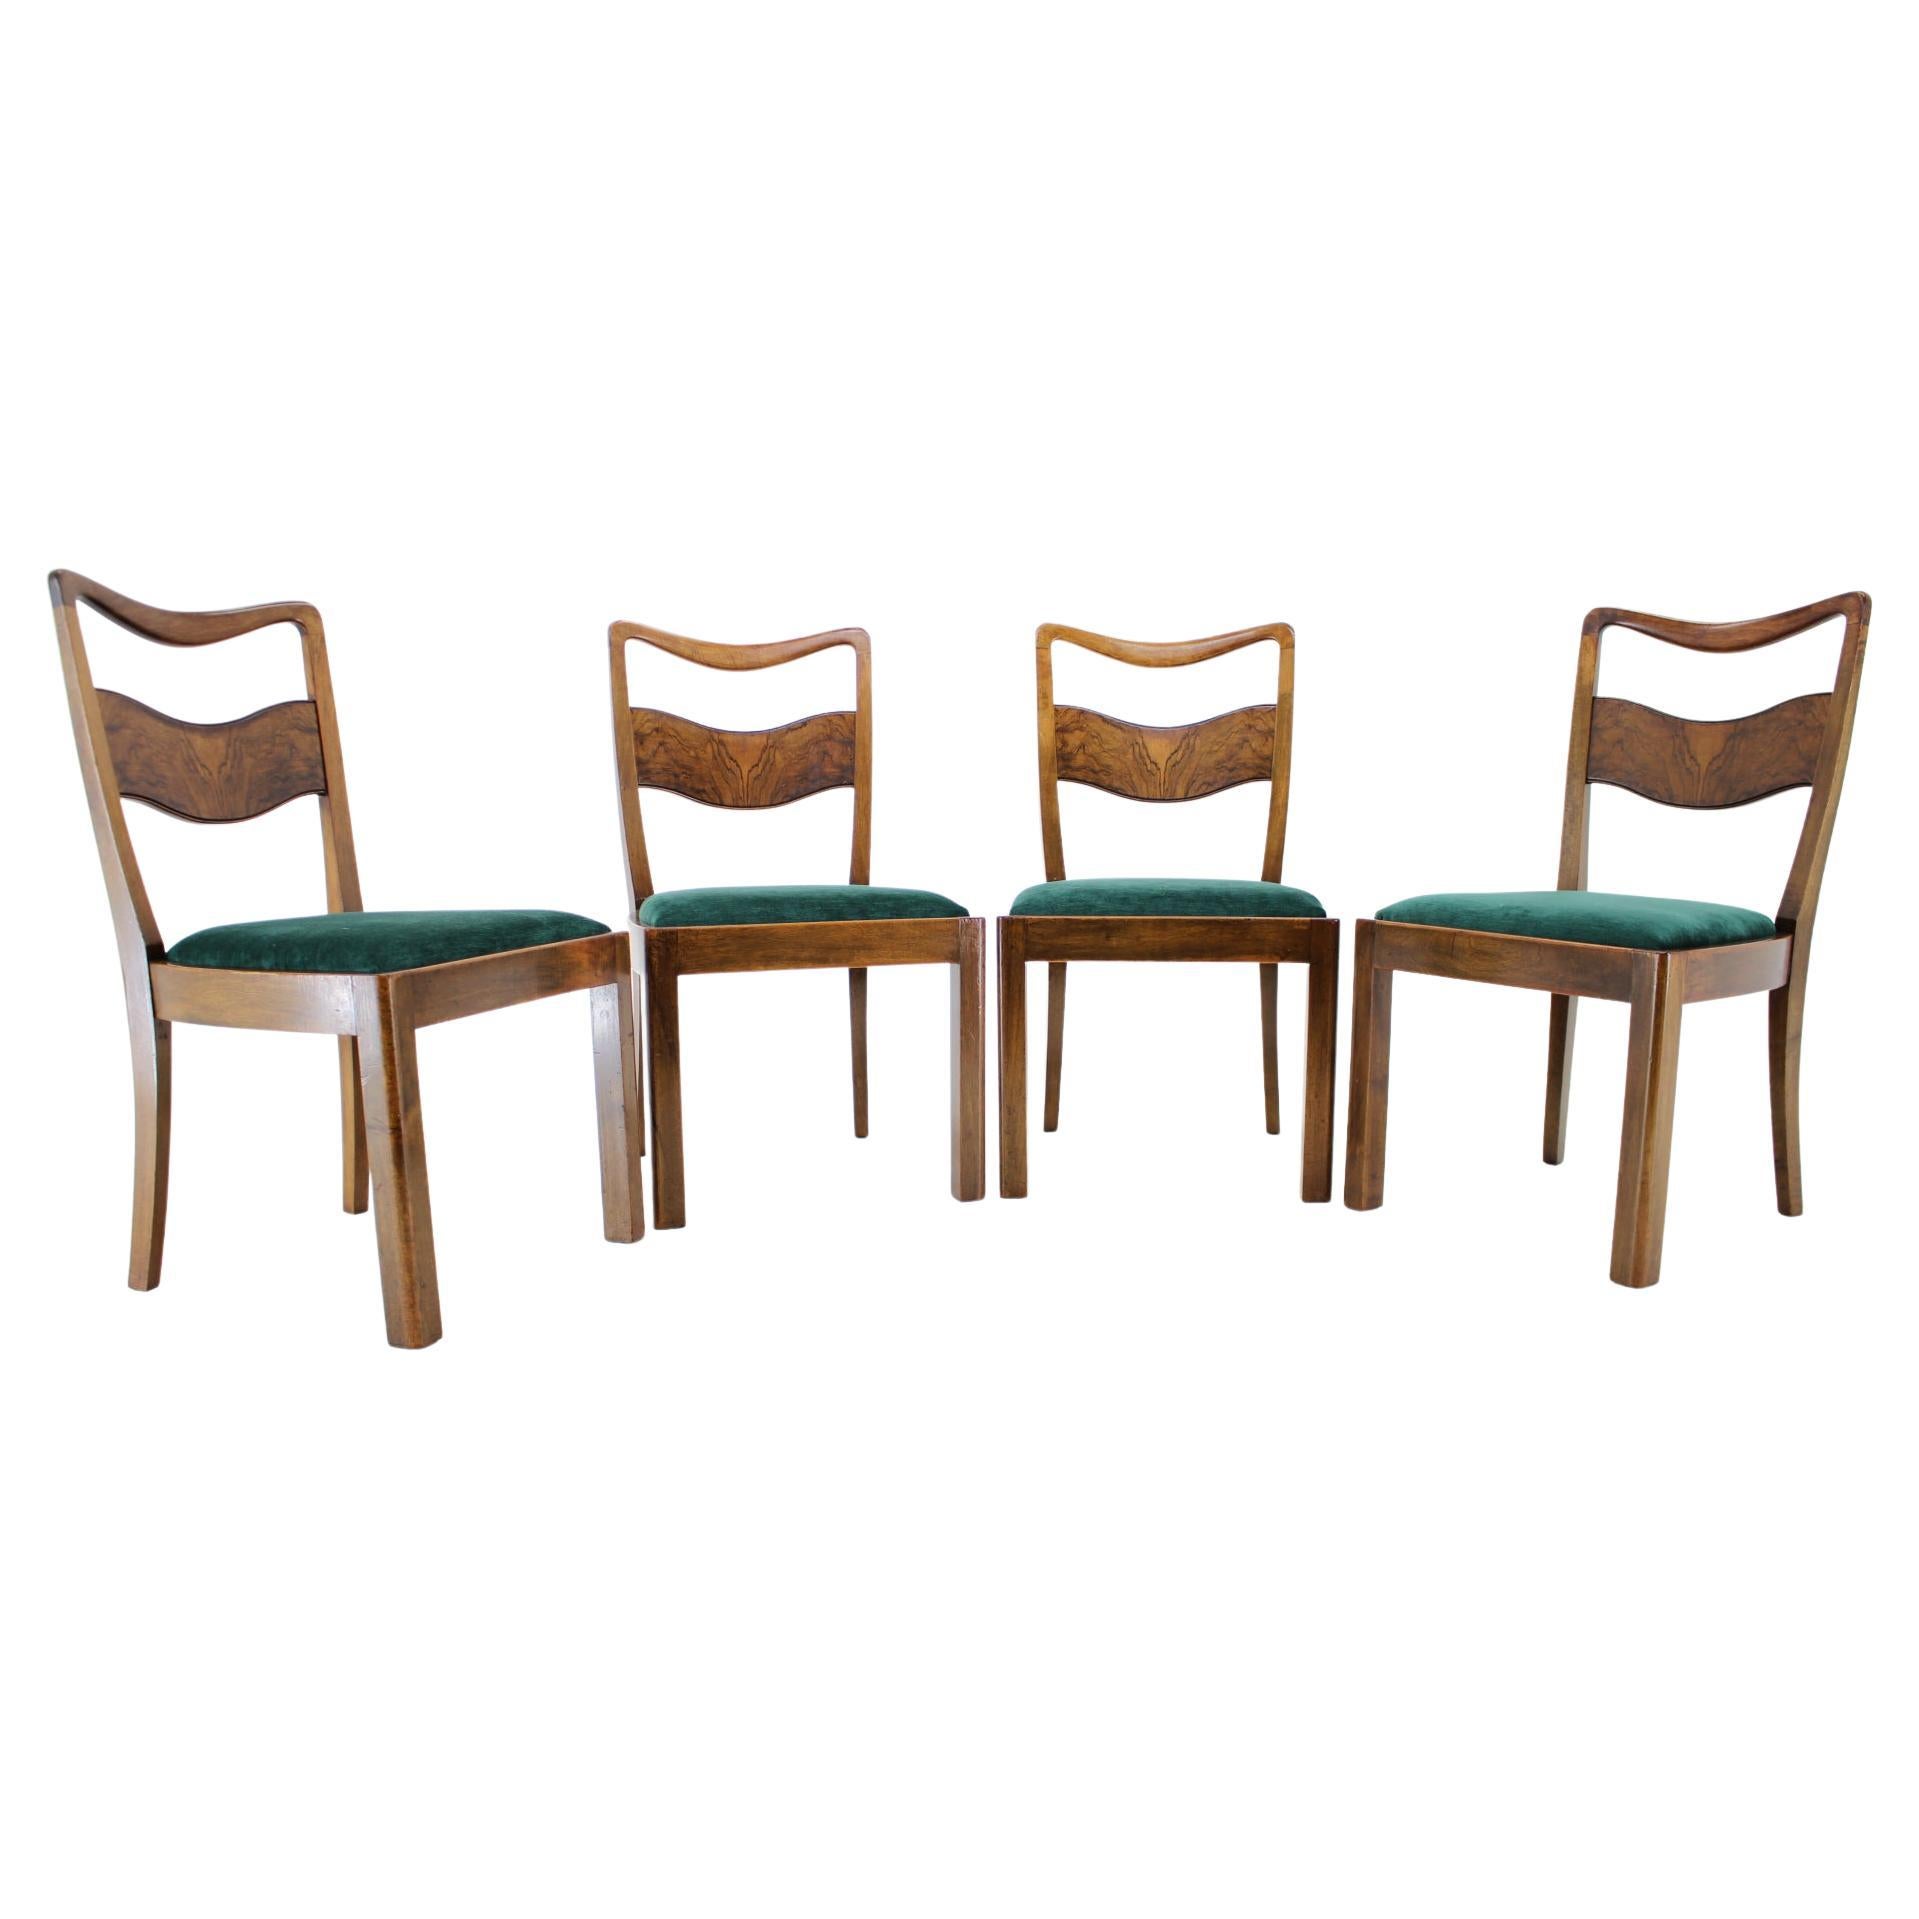 1930s Set of 4 Art Deco Dining Chairs, Czechoslovakia For Sale